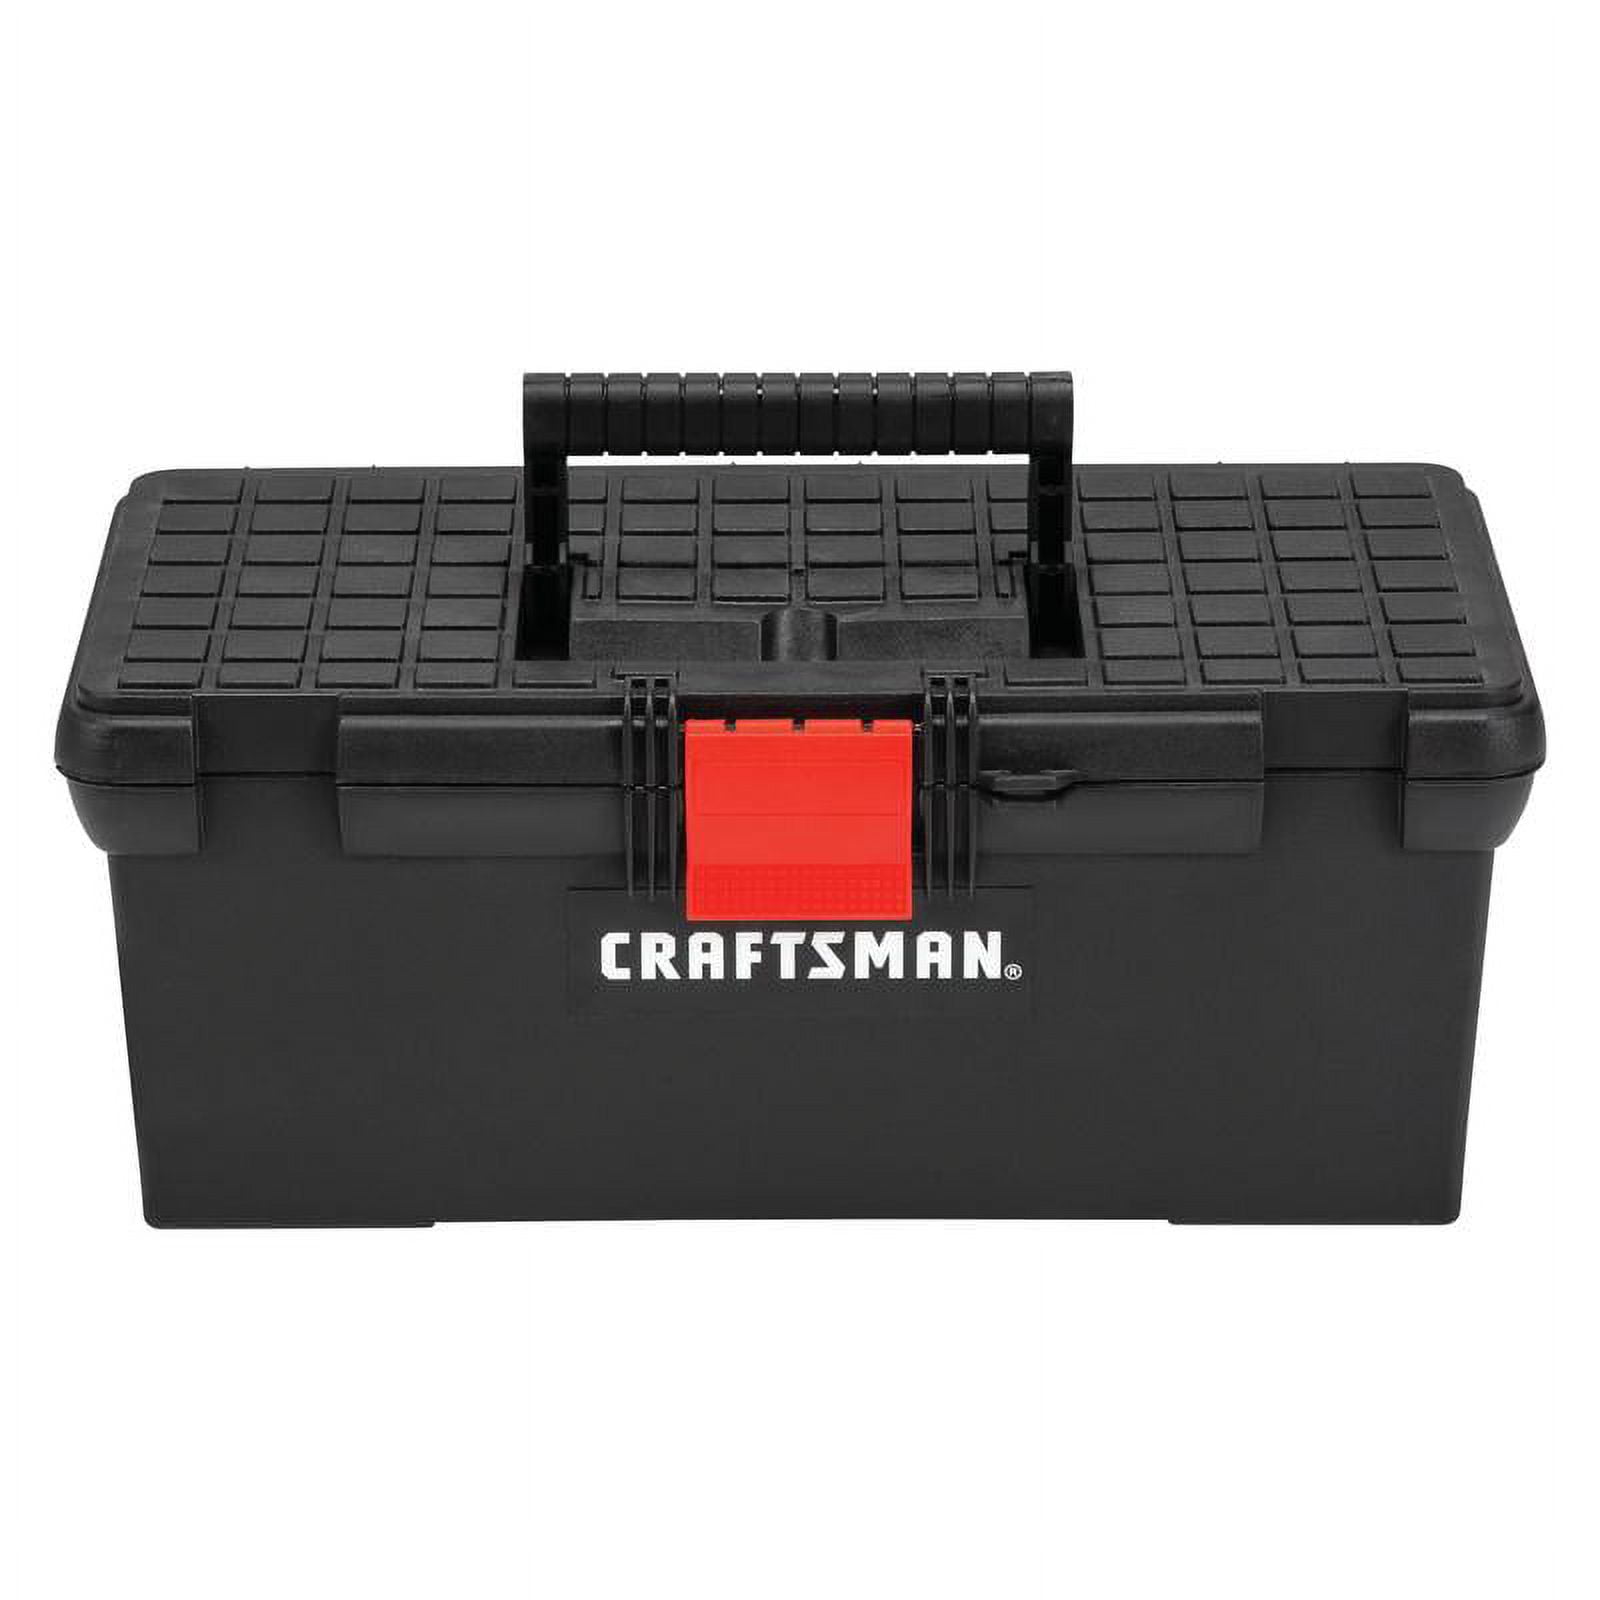 Diybox Strongo Black, Tool Boxes with Handle 16 inch, Tool Box Organizer, Small Tool Box with Drawers, Portable Plastic Storage, Suitable for  Home, Craftsman and Garage